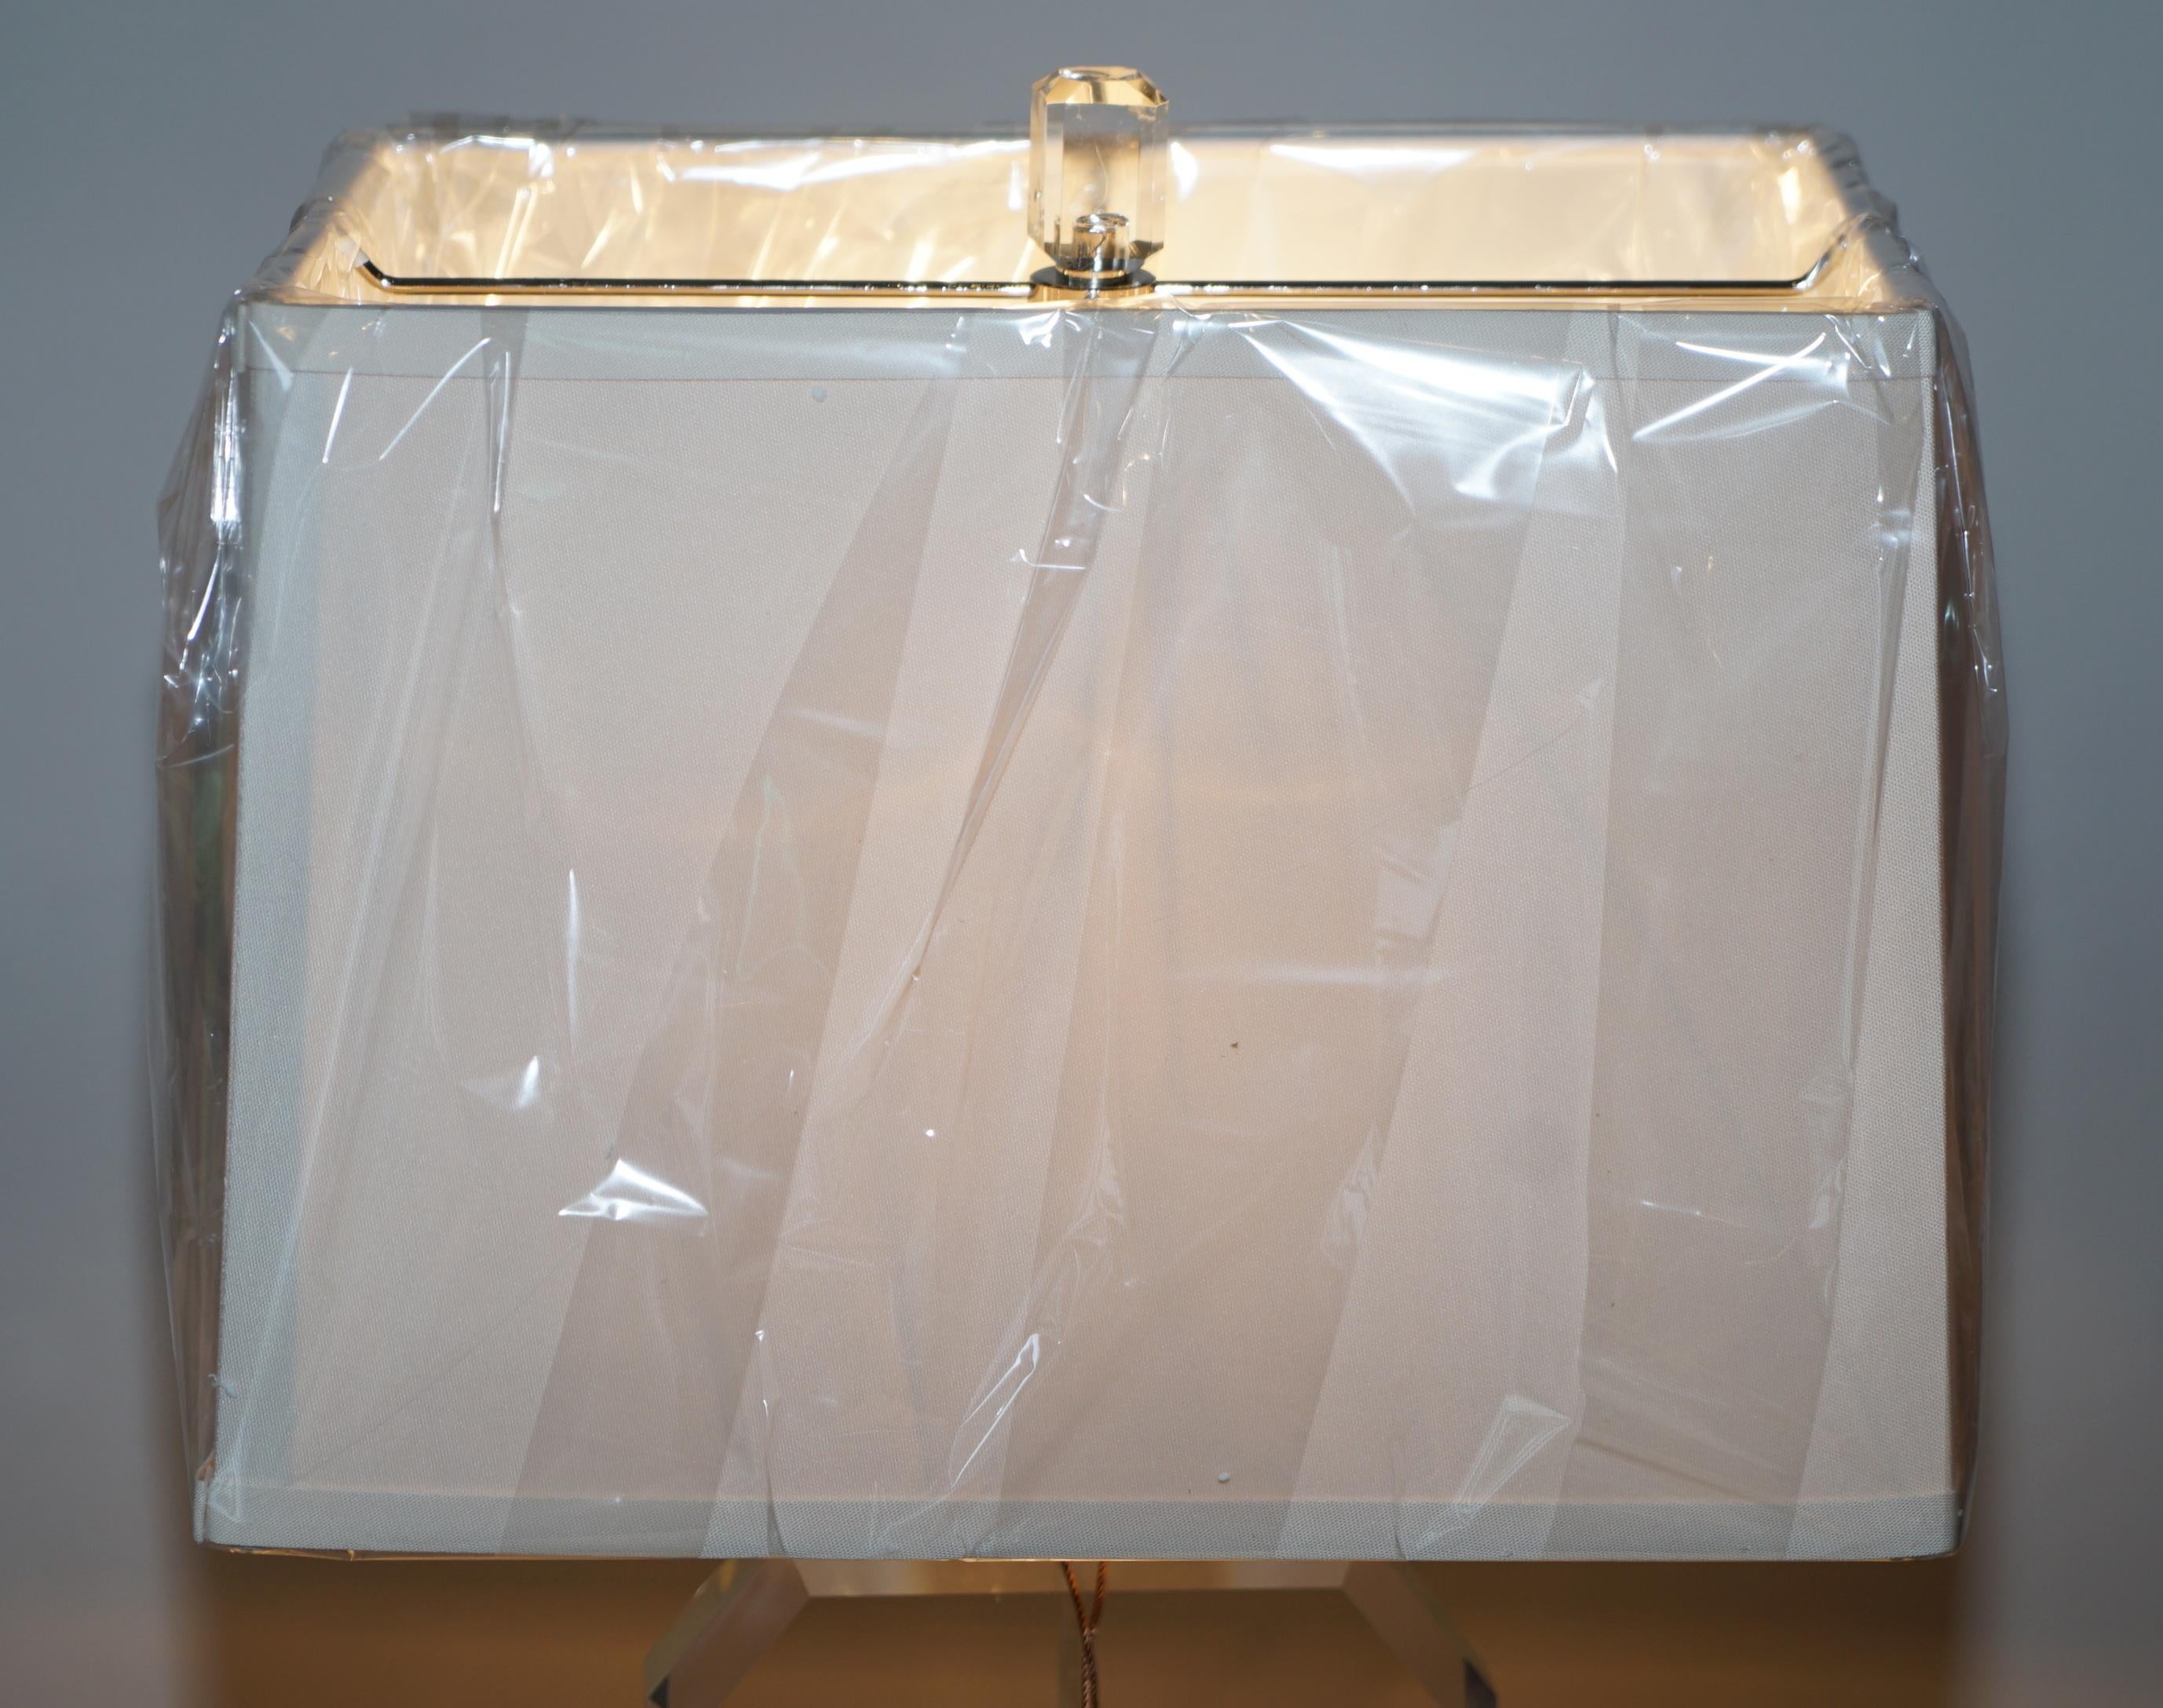 I am delighted to offer for sale this brand new in the original box Ralph Lauren bevelled Perspex table lamp

I have a number of brand new Ralph Lauren rugs and lamps in stock plus various Tommy Hilfiger bedding sets, please view my other items,